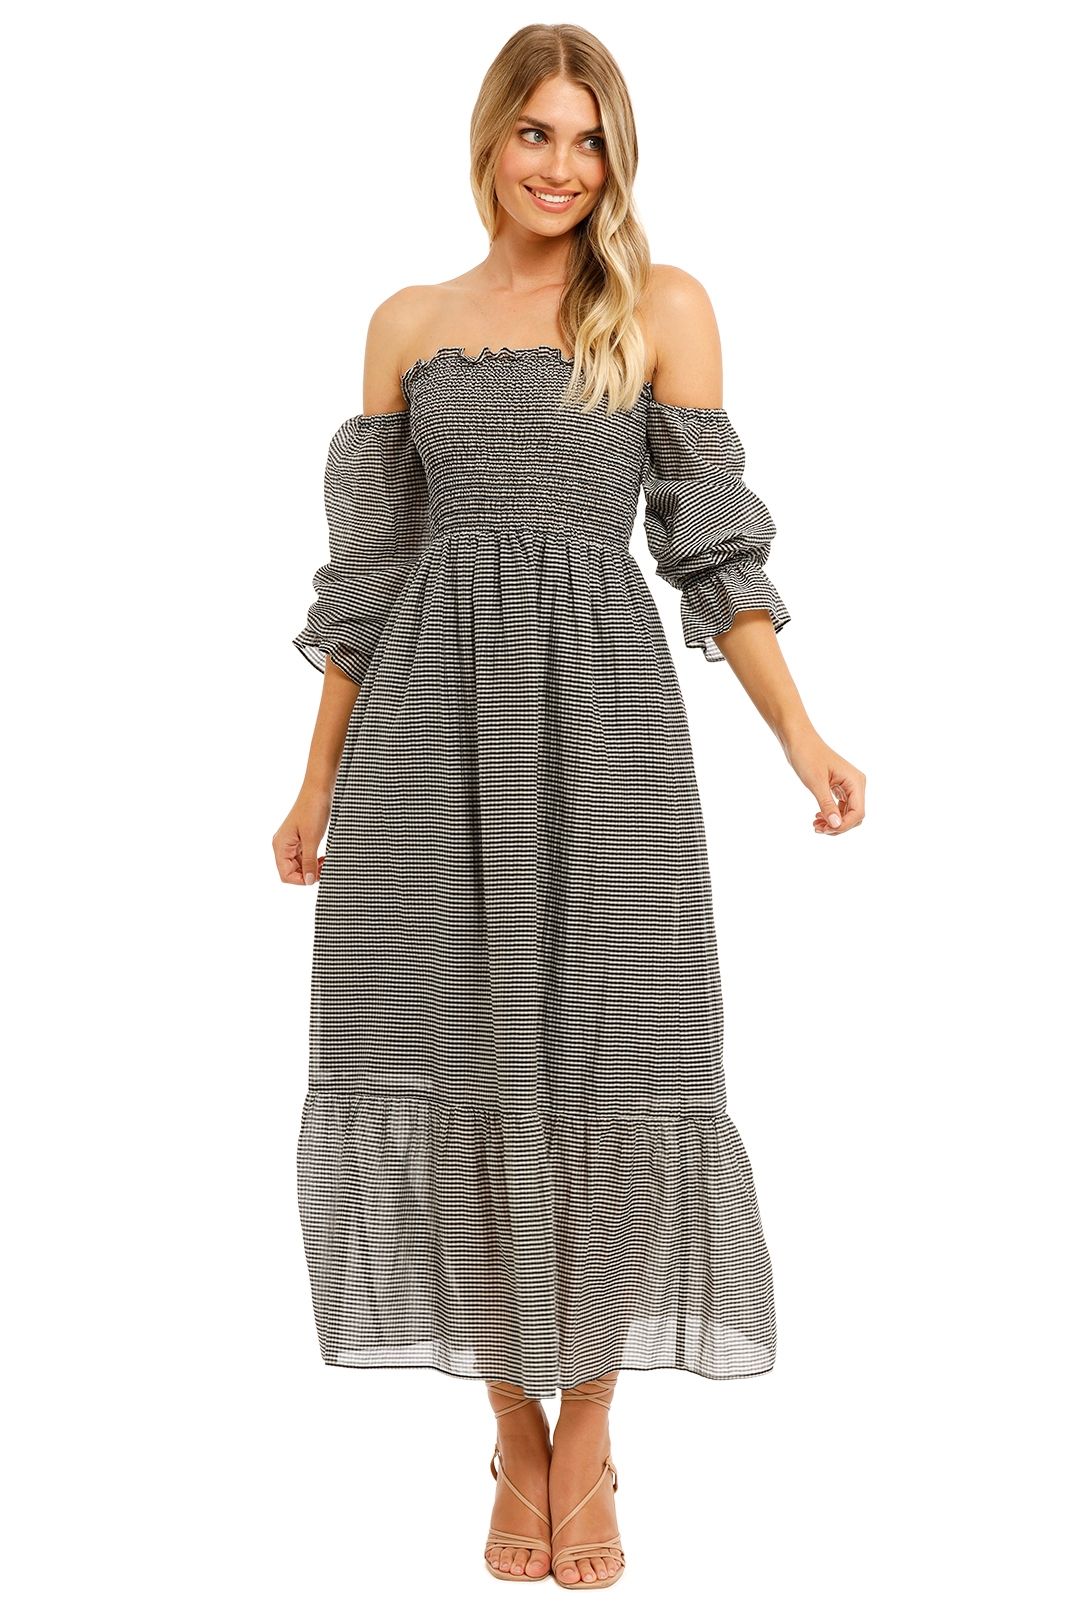 Jillian Boustred Esther Dress Gingham Fit and Flare